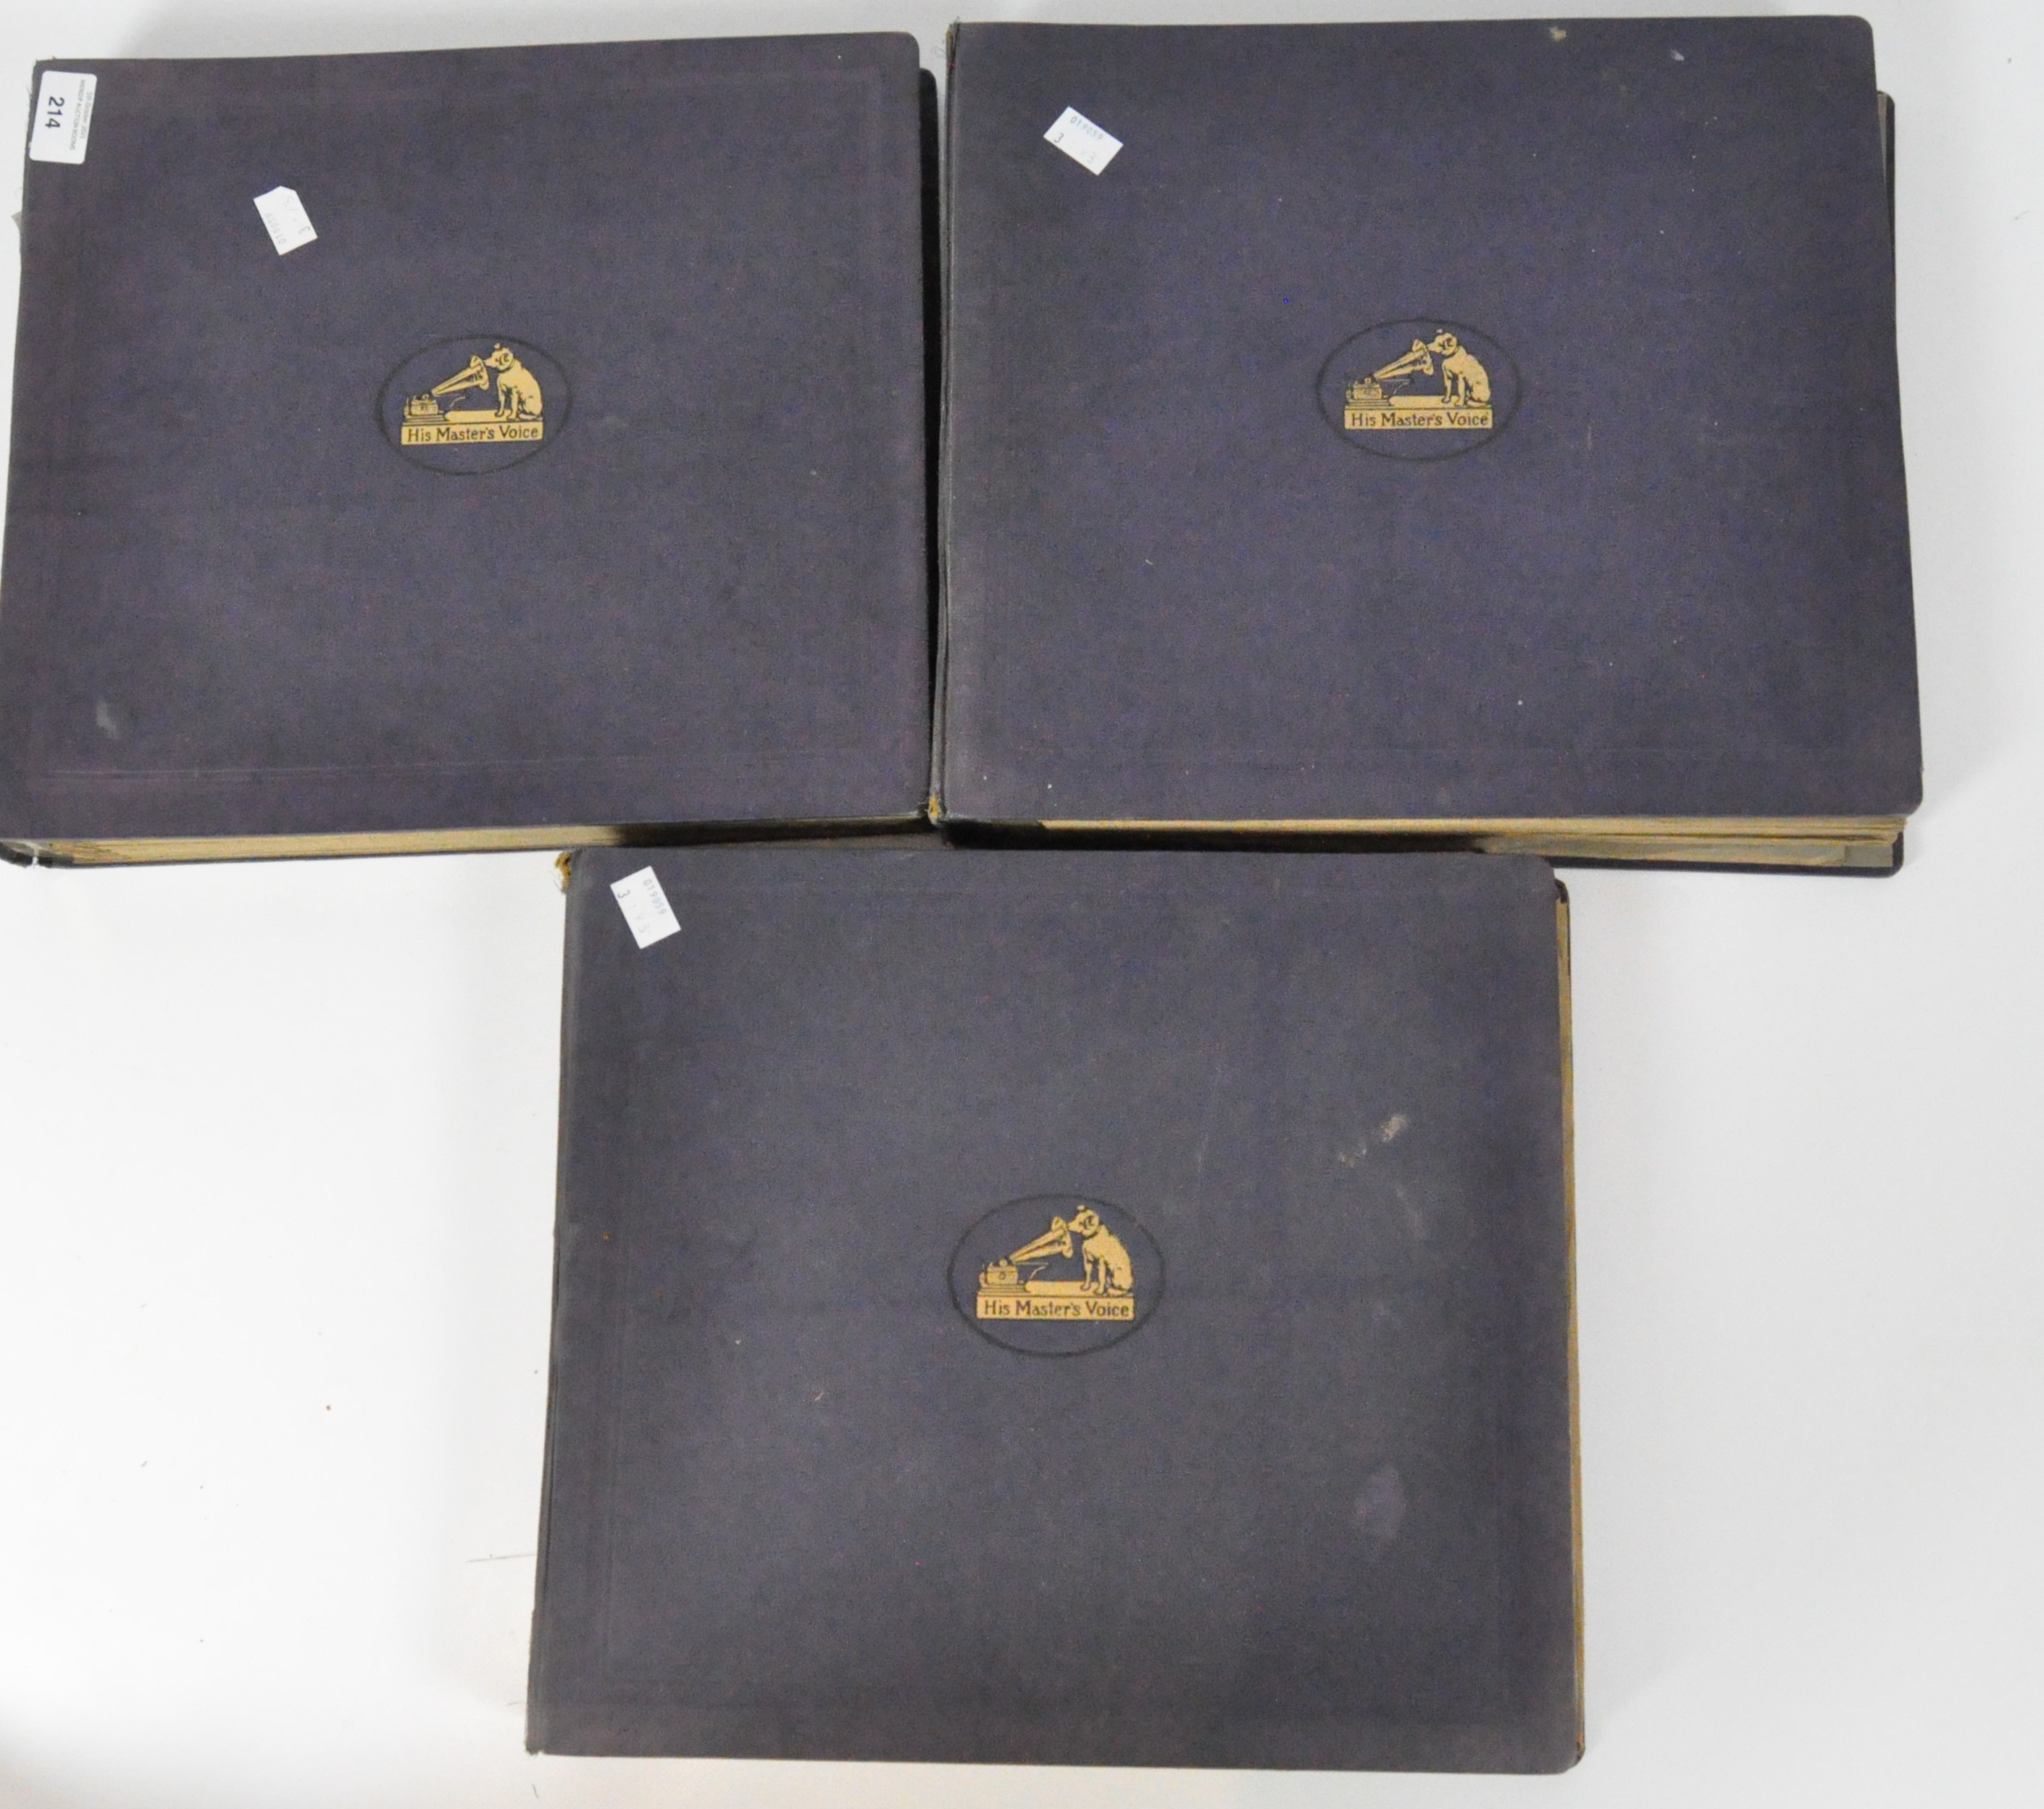 Three filled blue binders from RCA His Master's Voice to hold 12 records each,